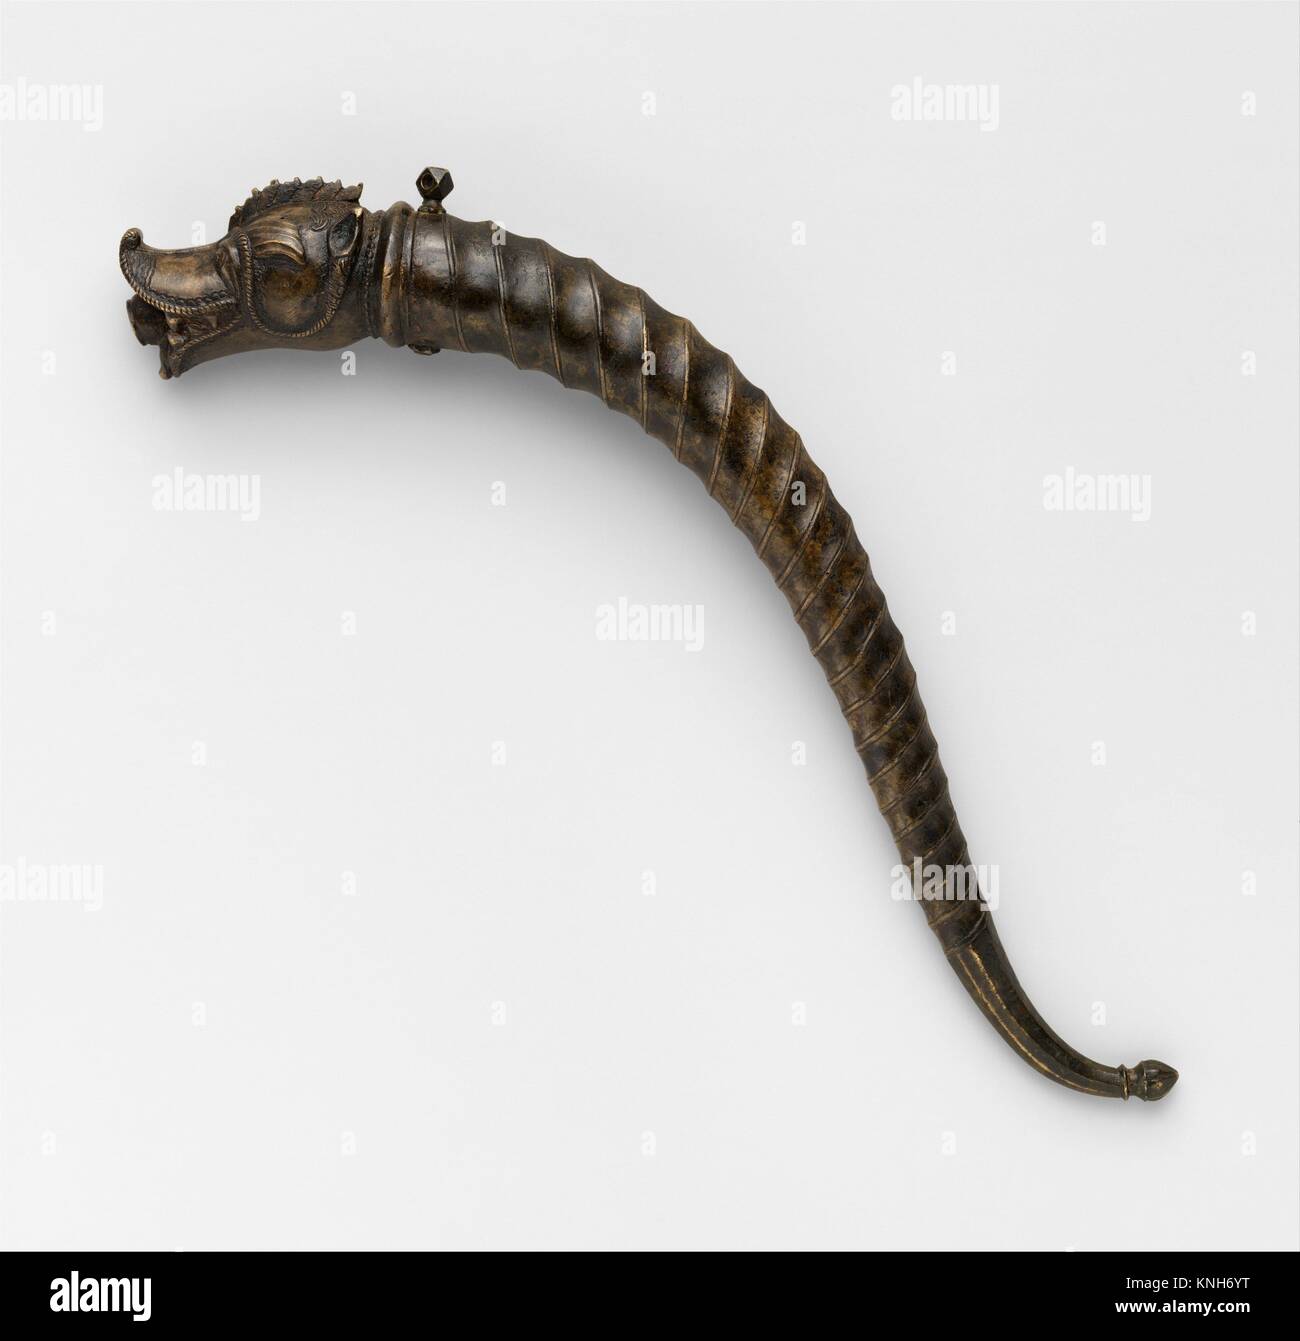 Primer. Date: 18th century; Geography: Rajasthan; Culture: Indian, Rajasthan; Medium: Brass; Dimensions: L. 10 1/2 in. (26.7 cm); D. 1 in. (2.5 cm); Stock Photo